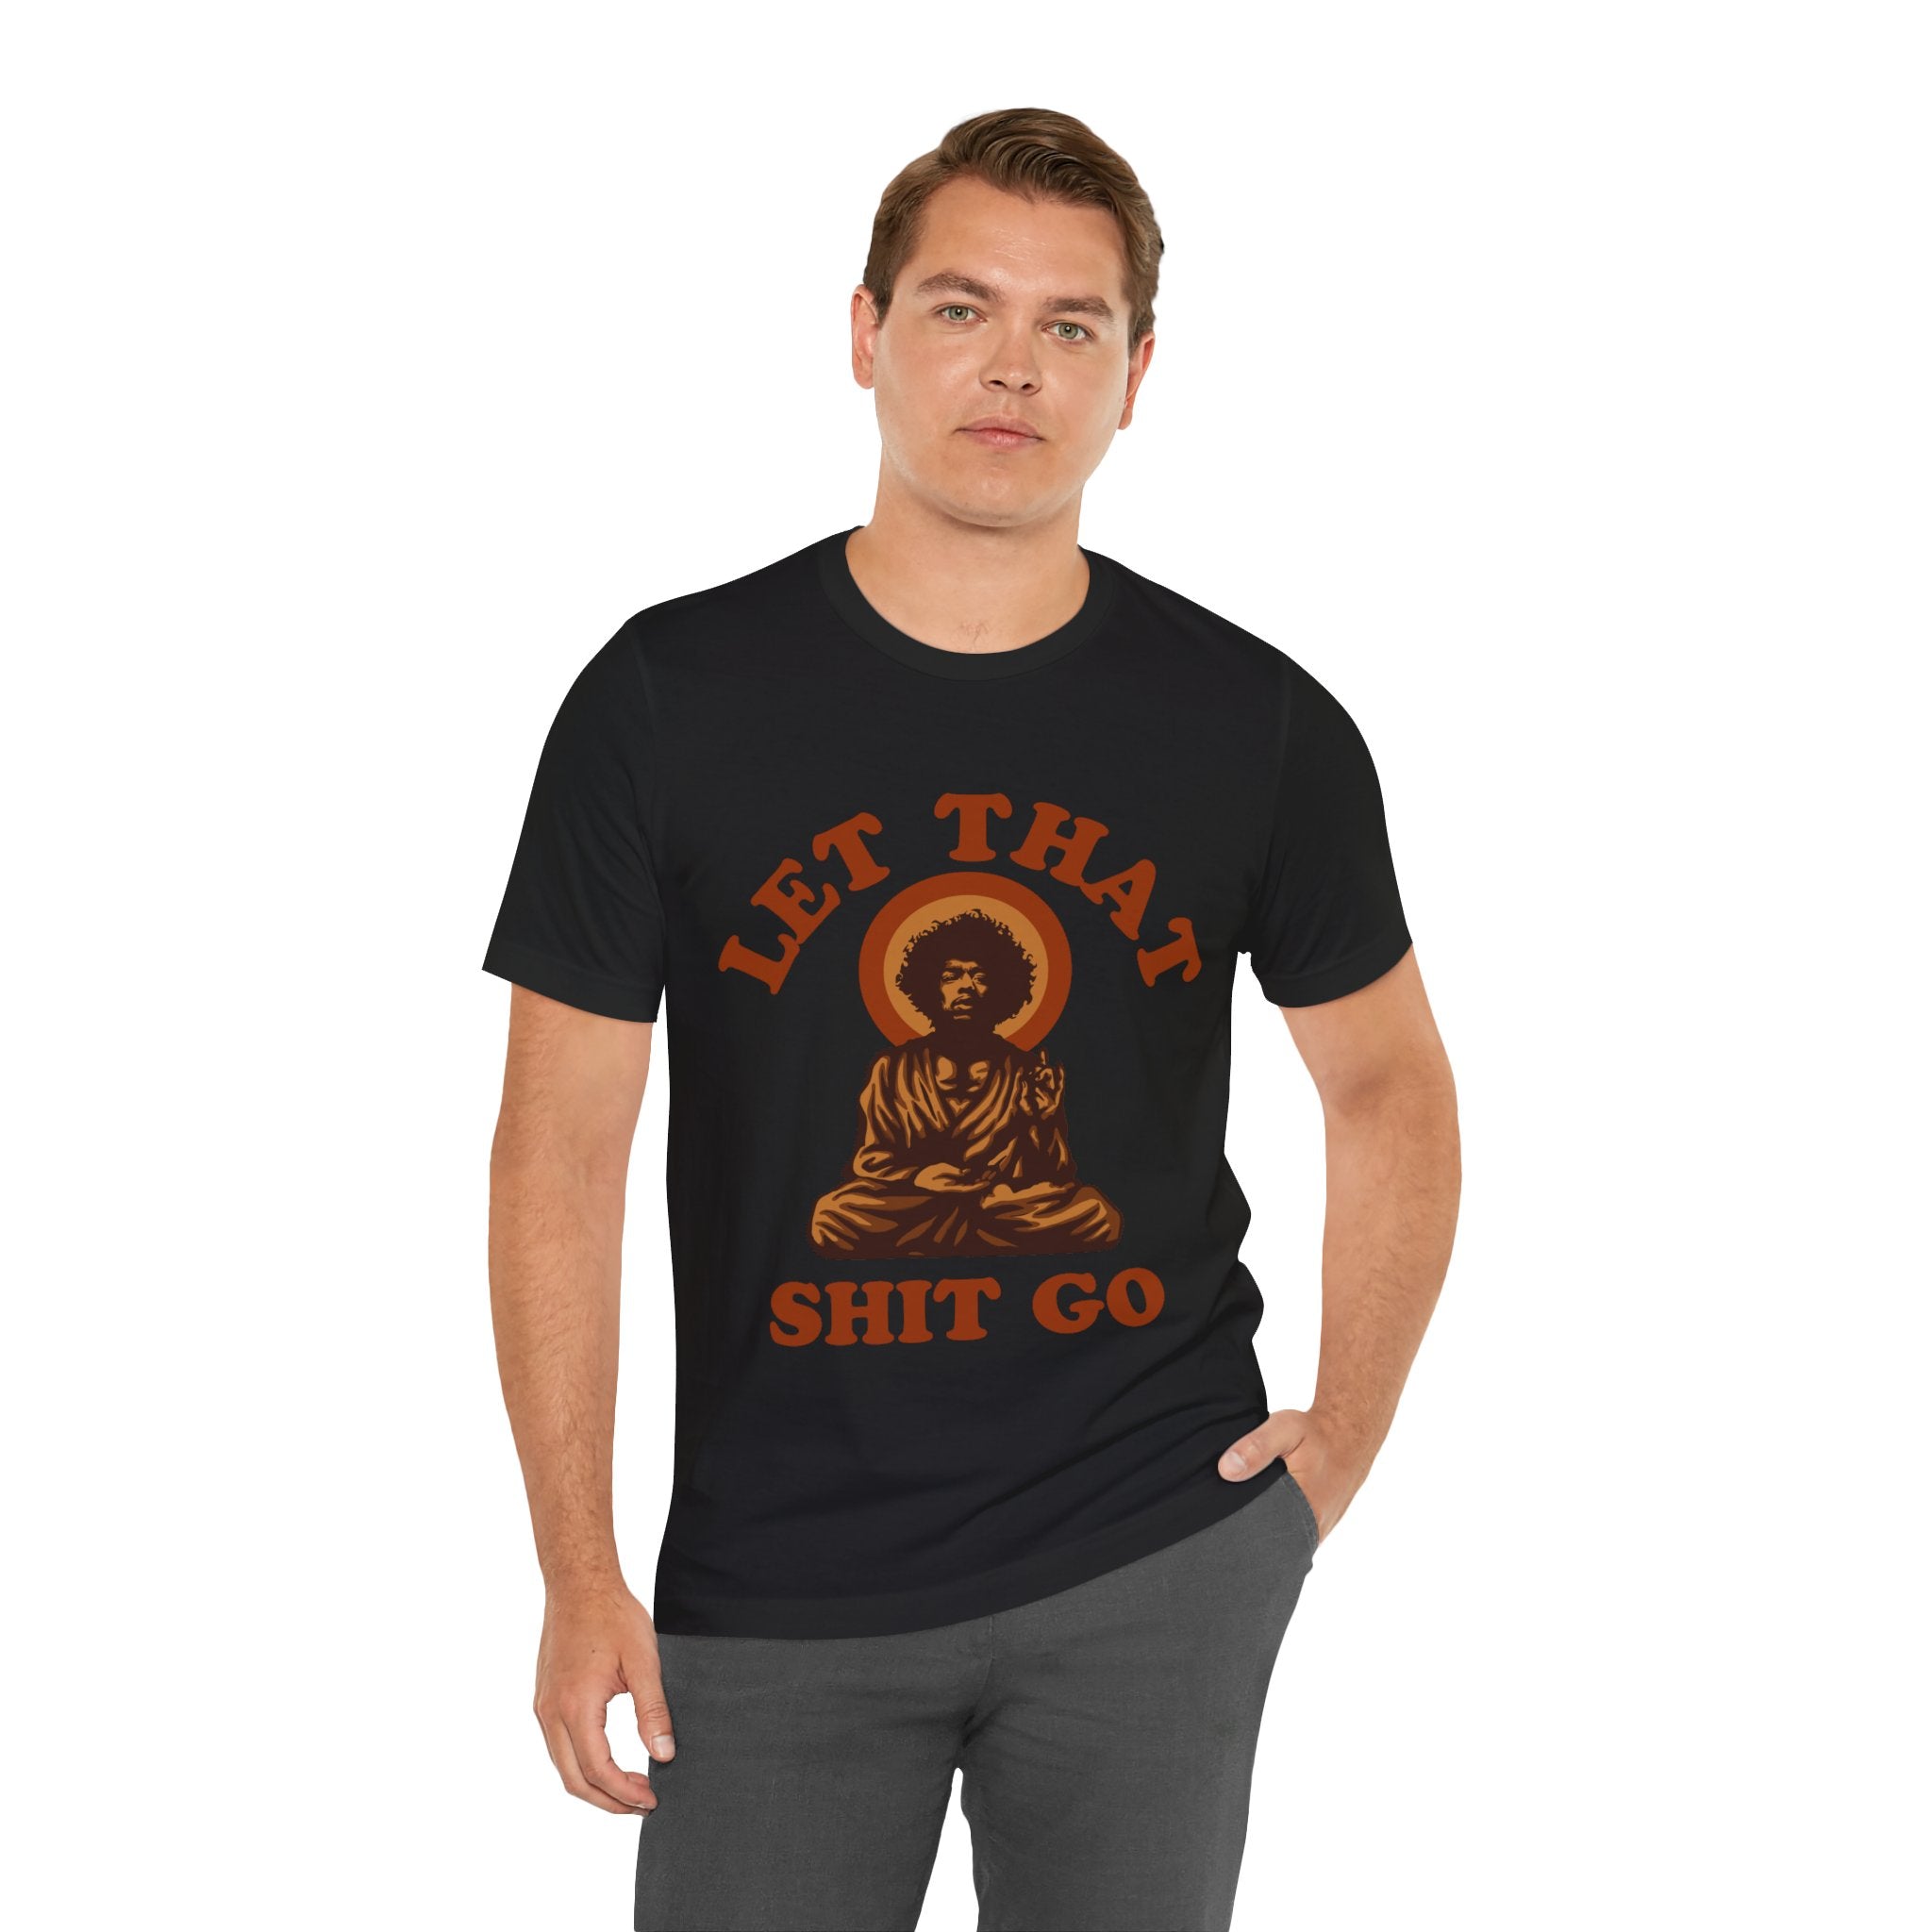 Man in a black Let That Shit Go T-shirt with a humorous design featuring a meditating figure and the phrase displayed on it.